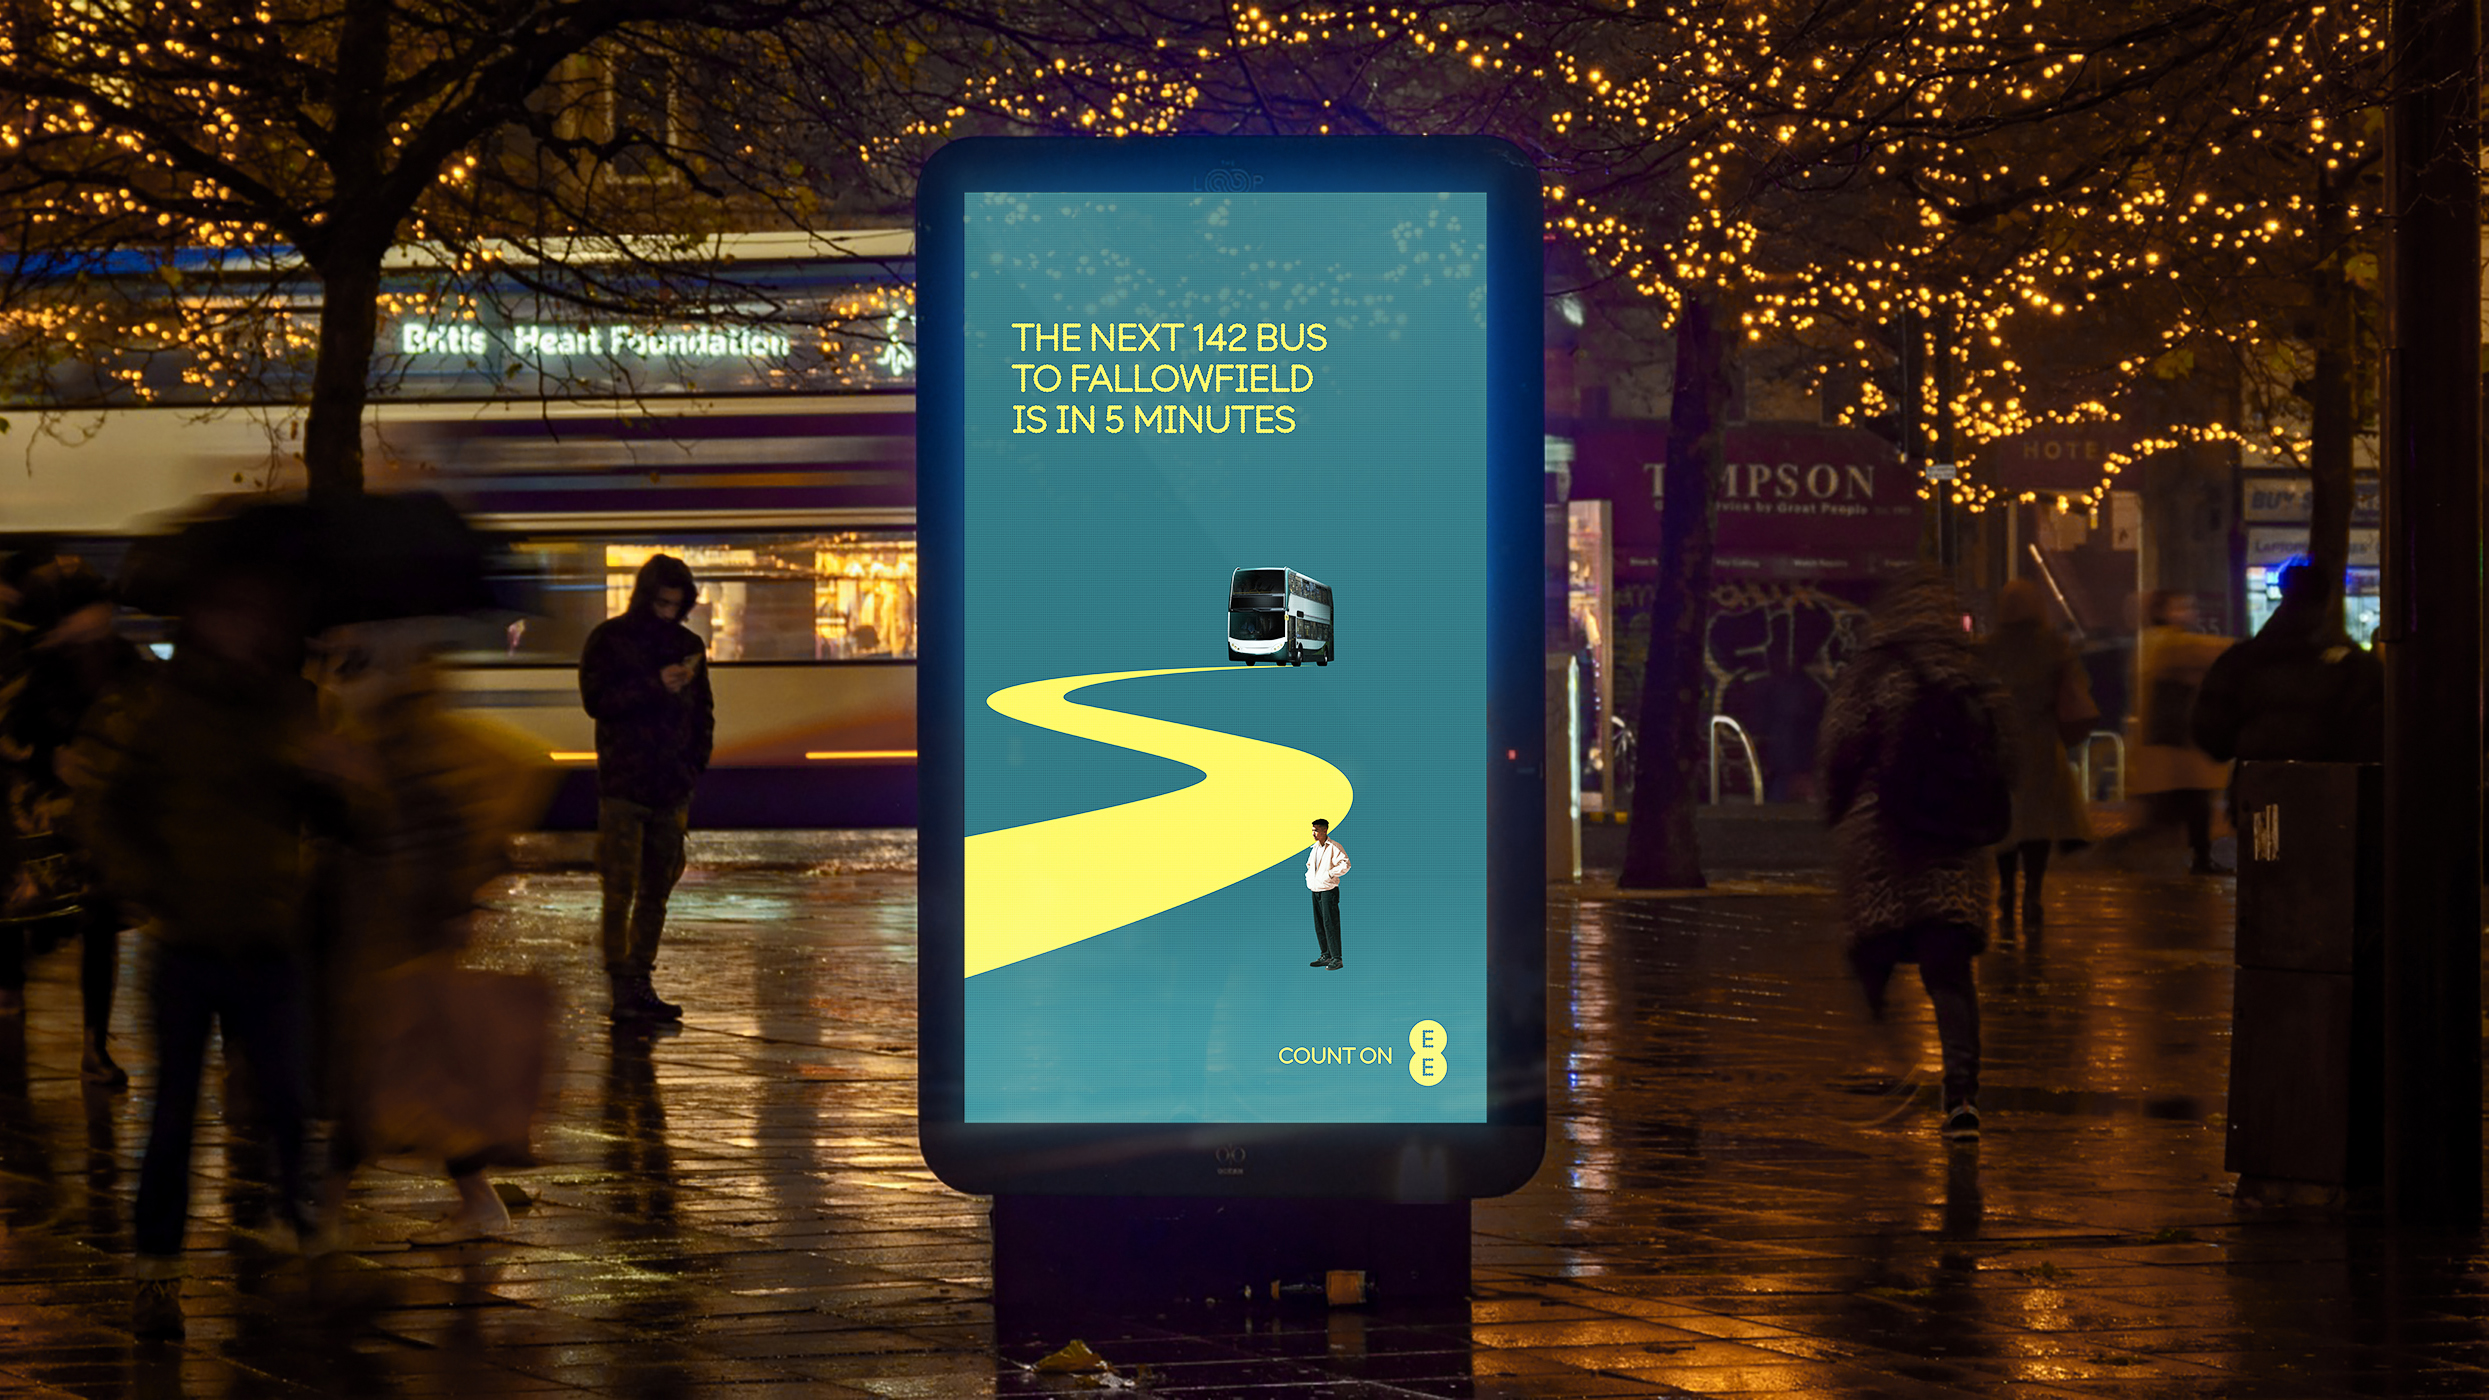 EE Billboards help people get home safely in Manchester